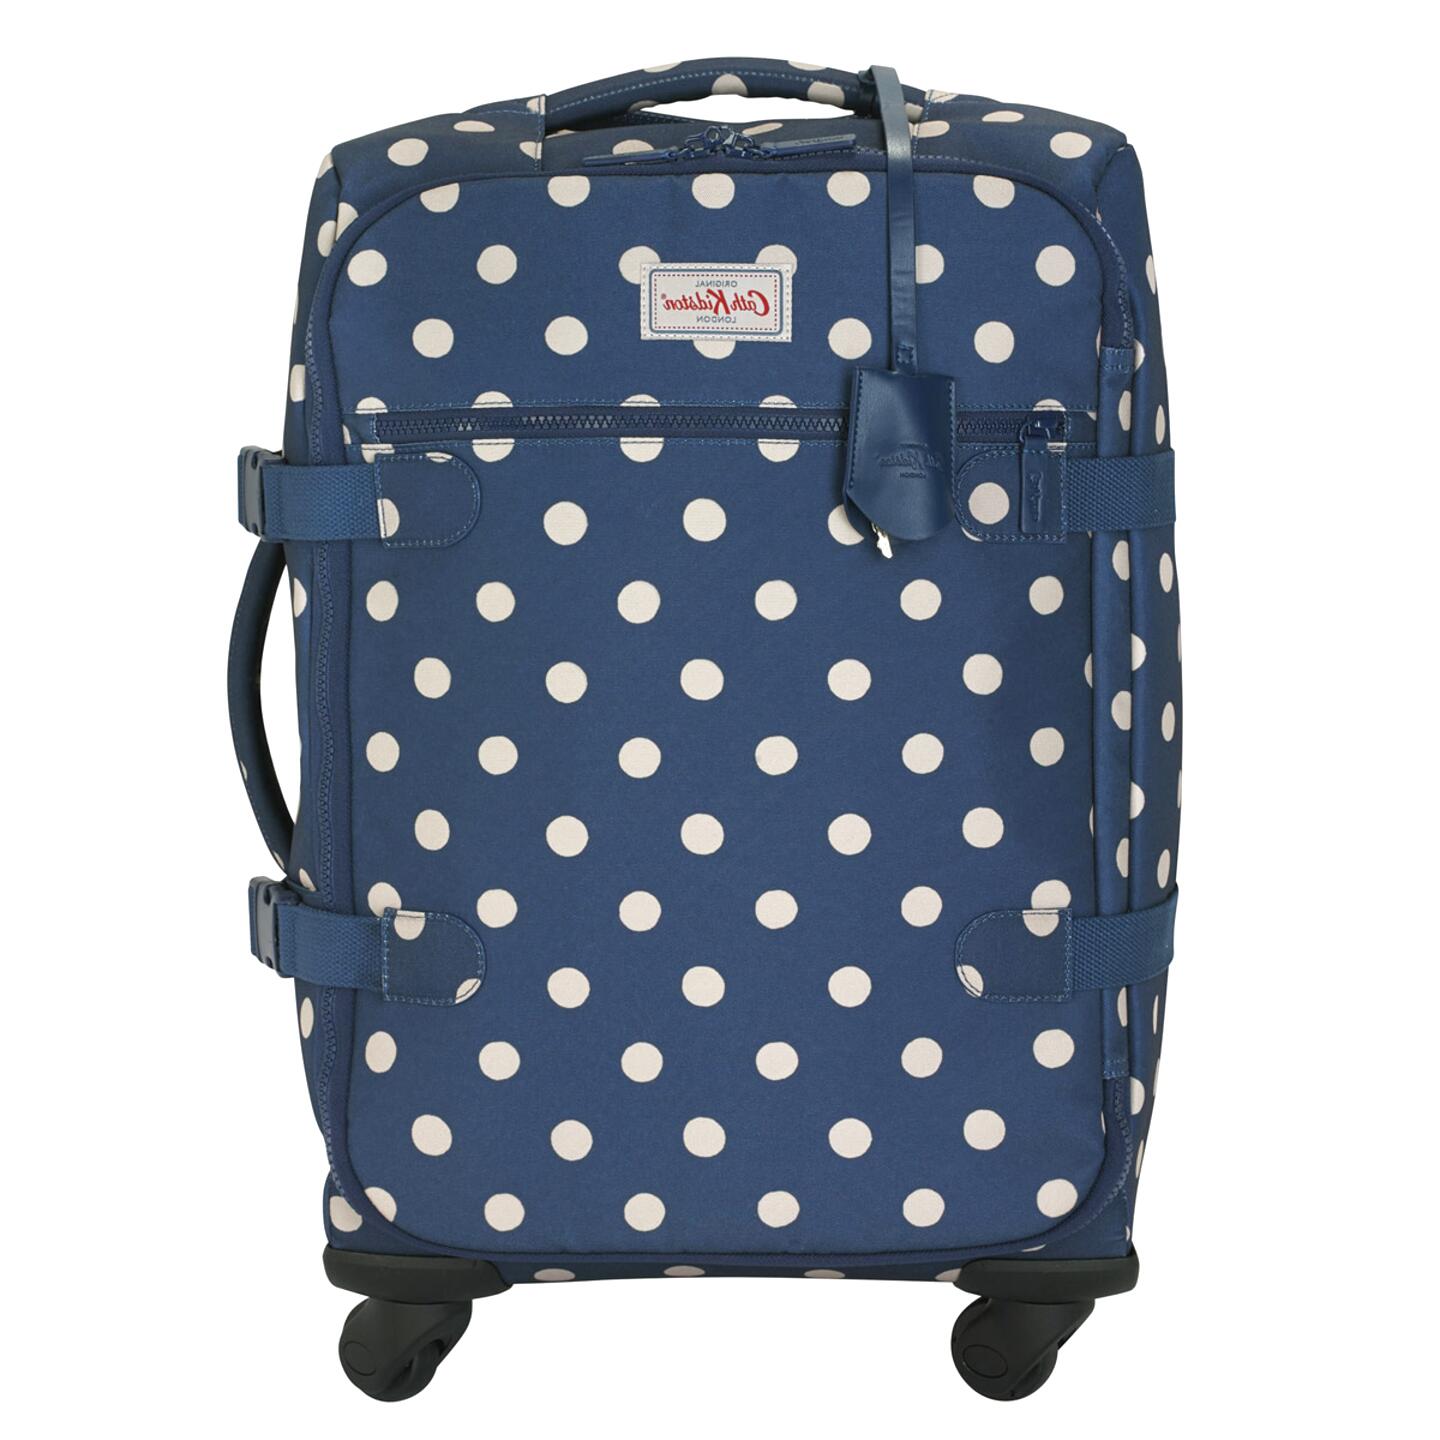 Cath Kidston Suitcase for sale in UK | 45 used Cath Kidston Suitcases